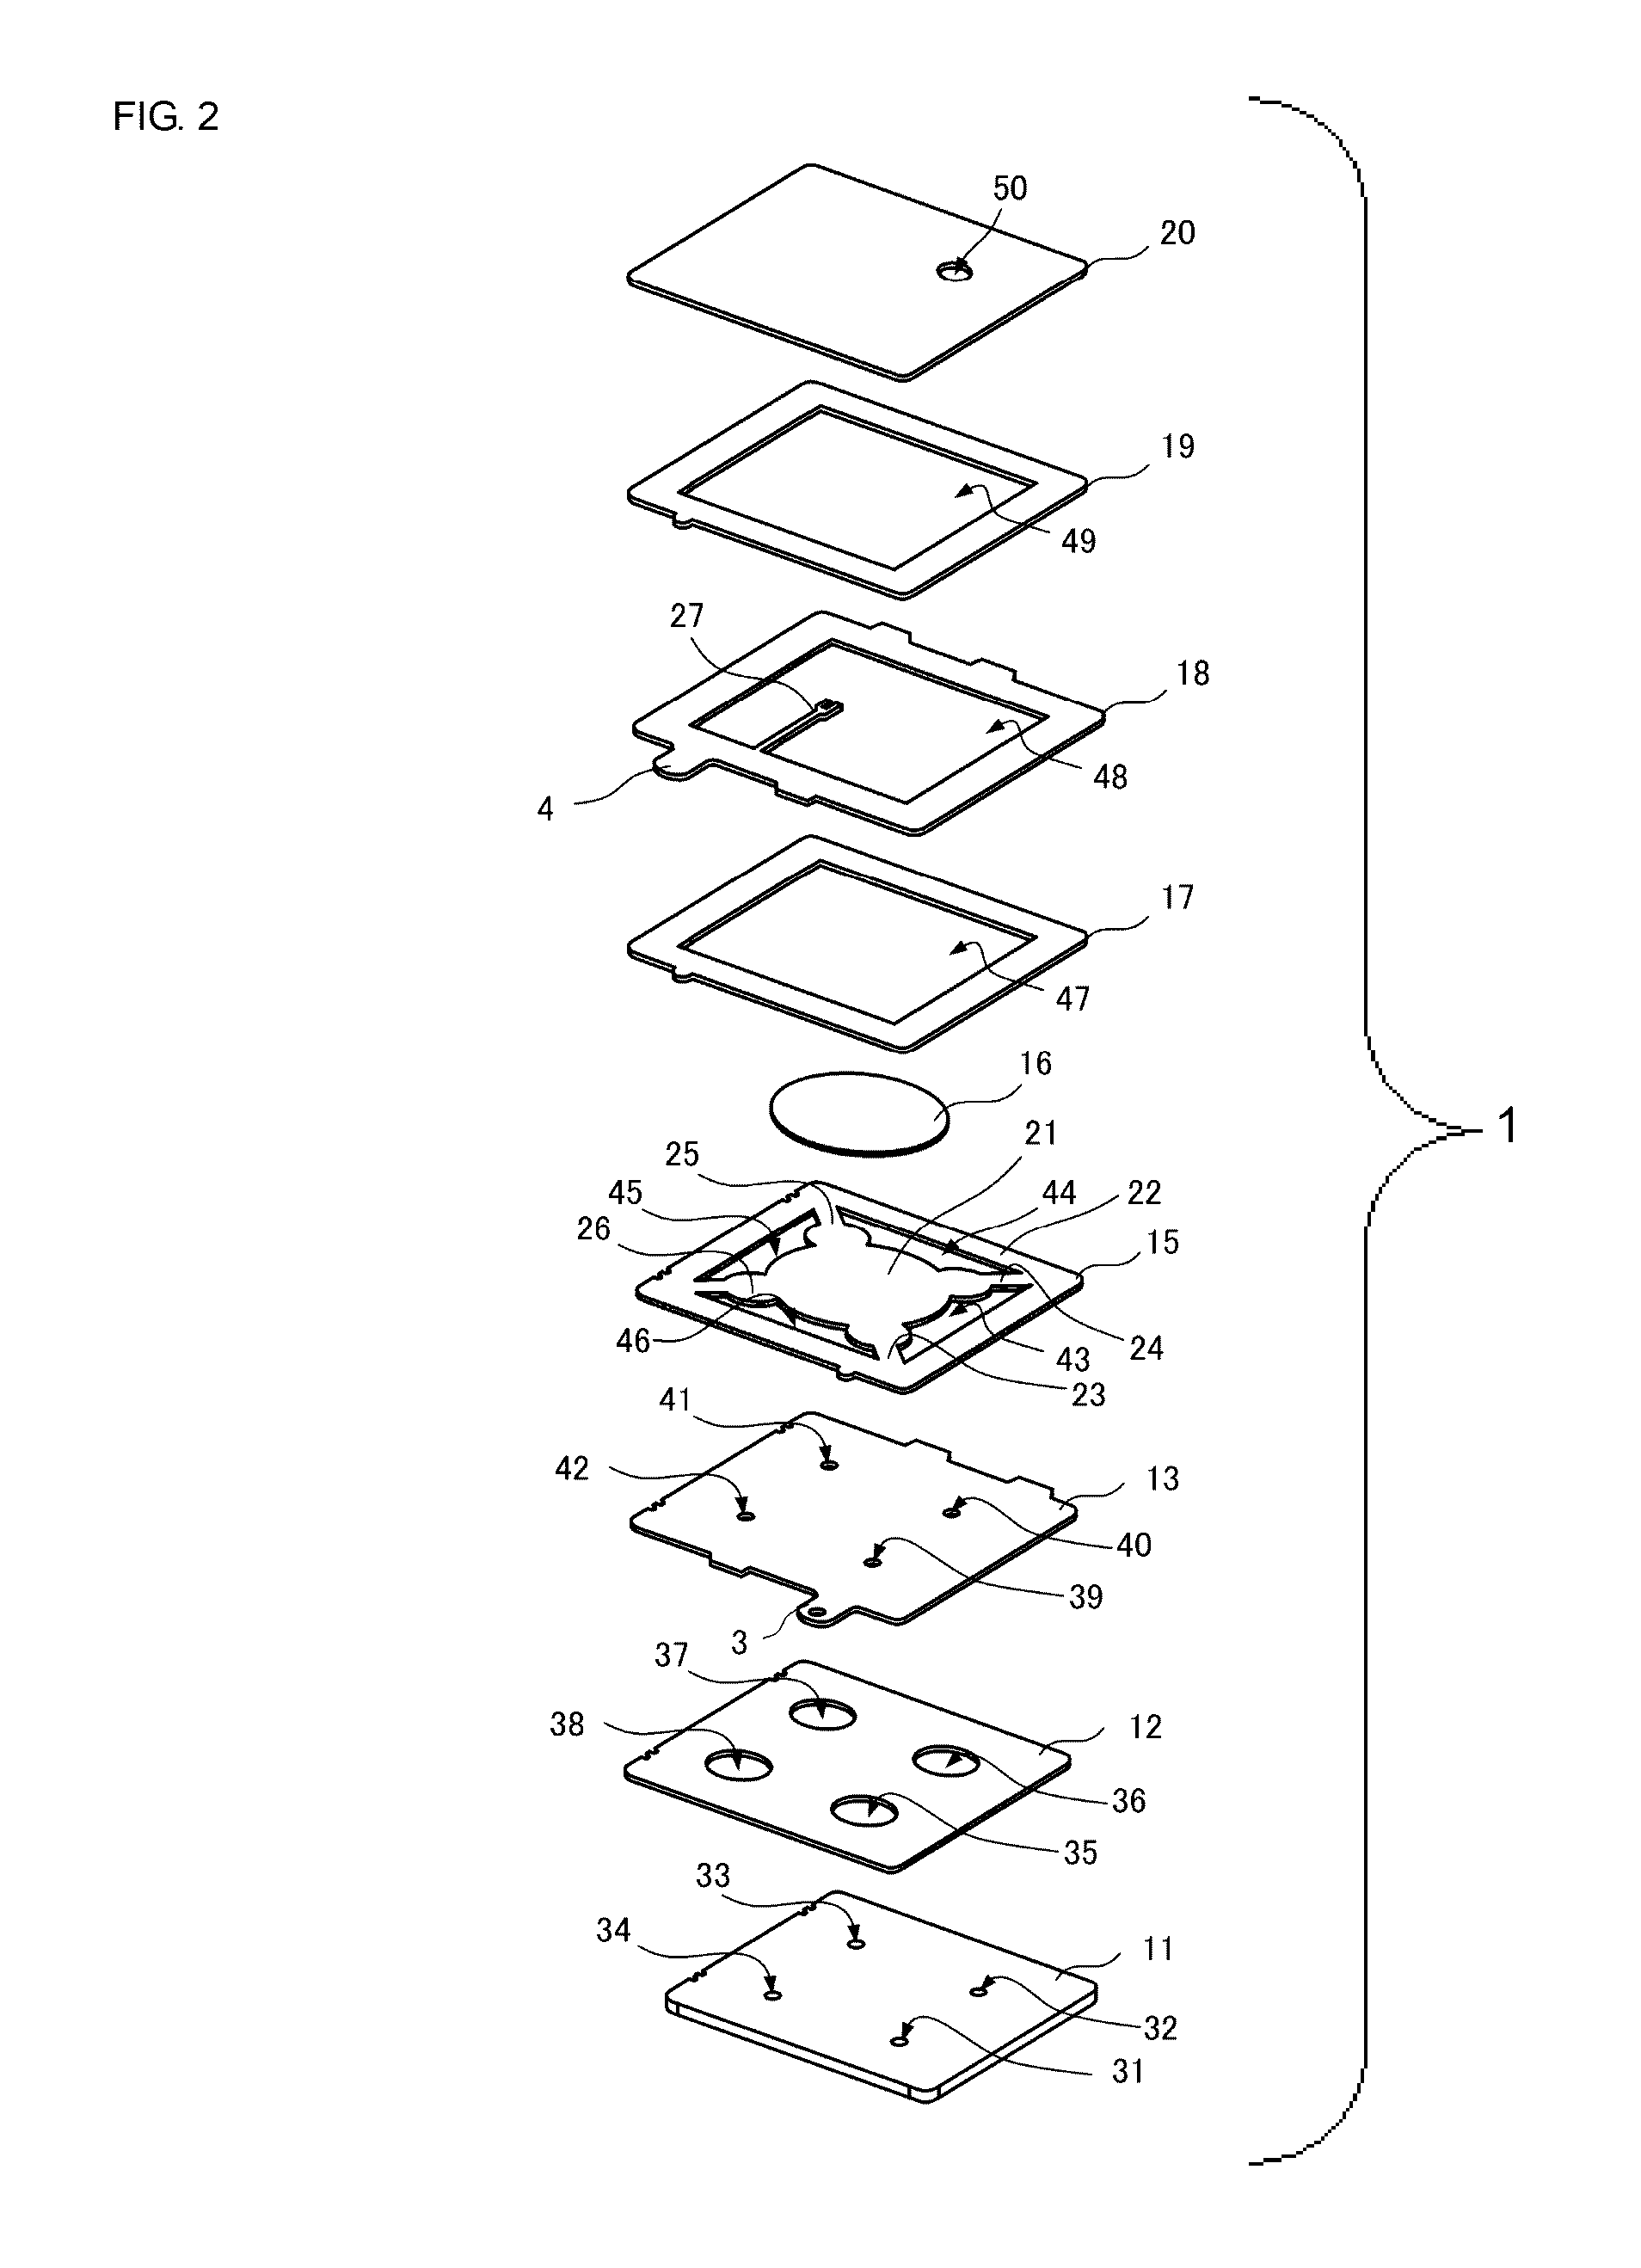 Fluid control device and pump